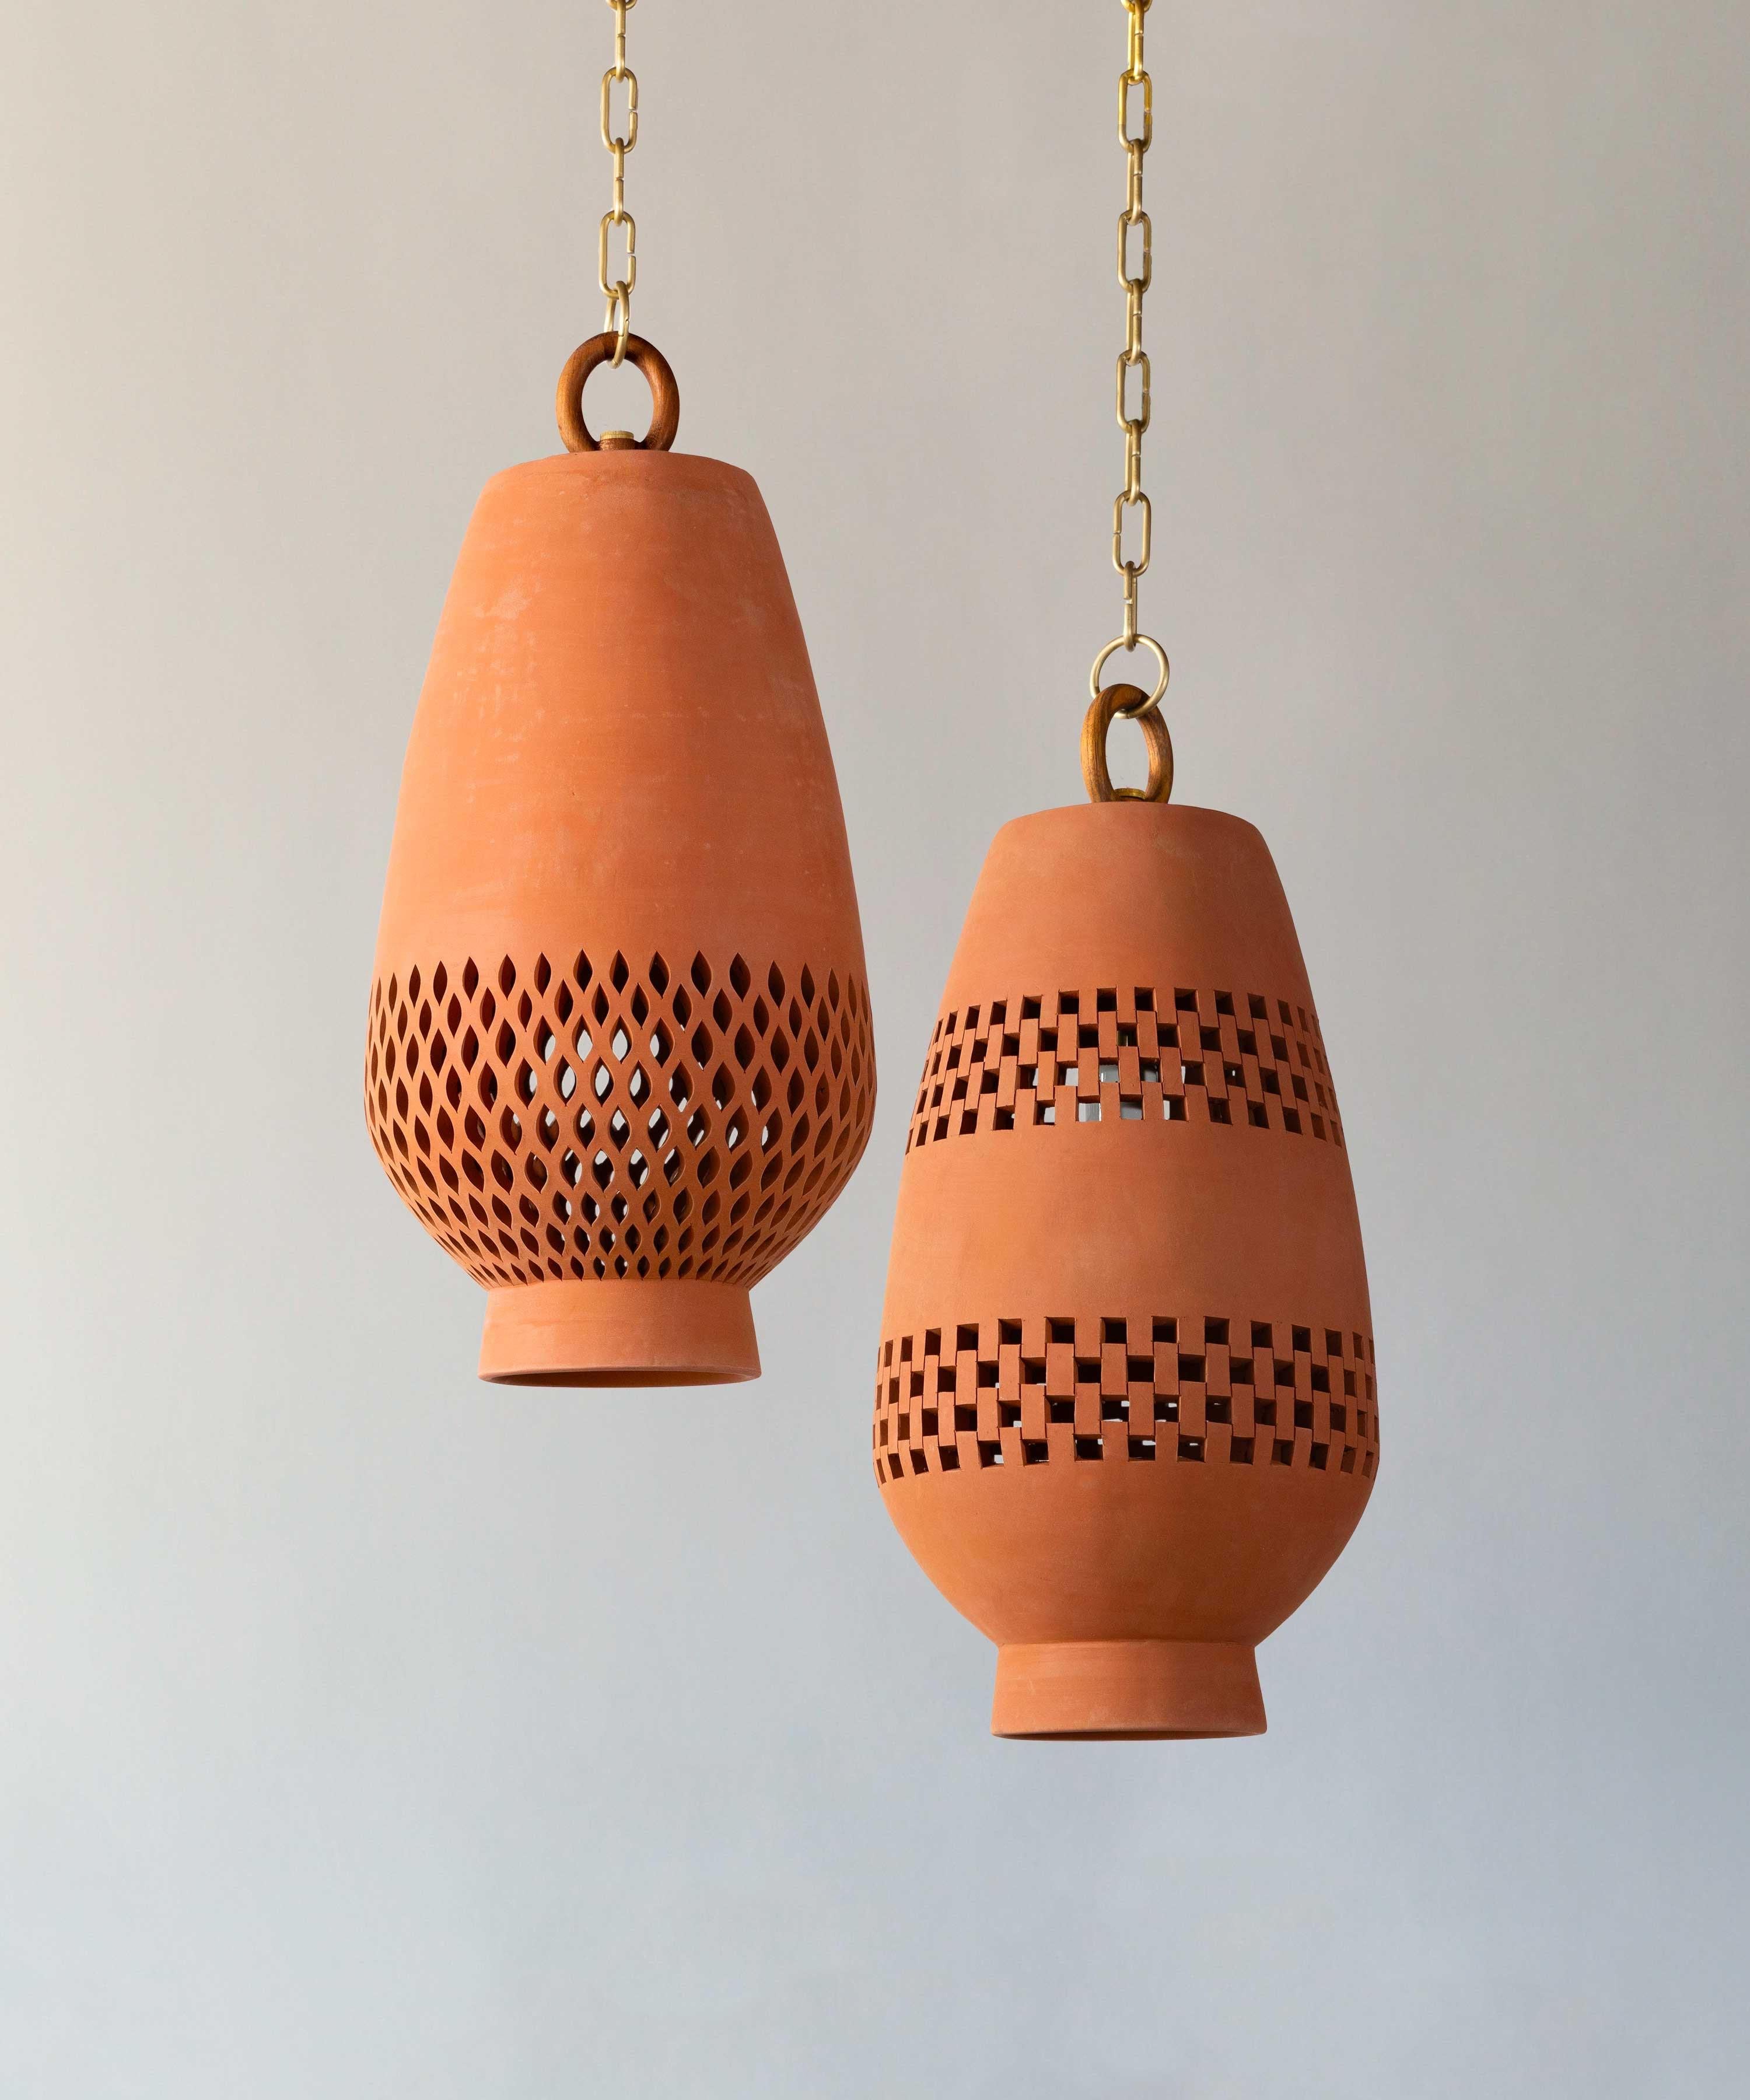 Hand-Crafted Terracotta Ceramic Pendant Light XL, Aged Brass, Ajedrez Atzompa Collection For Sale